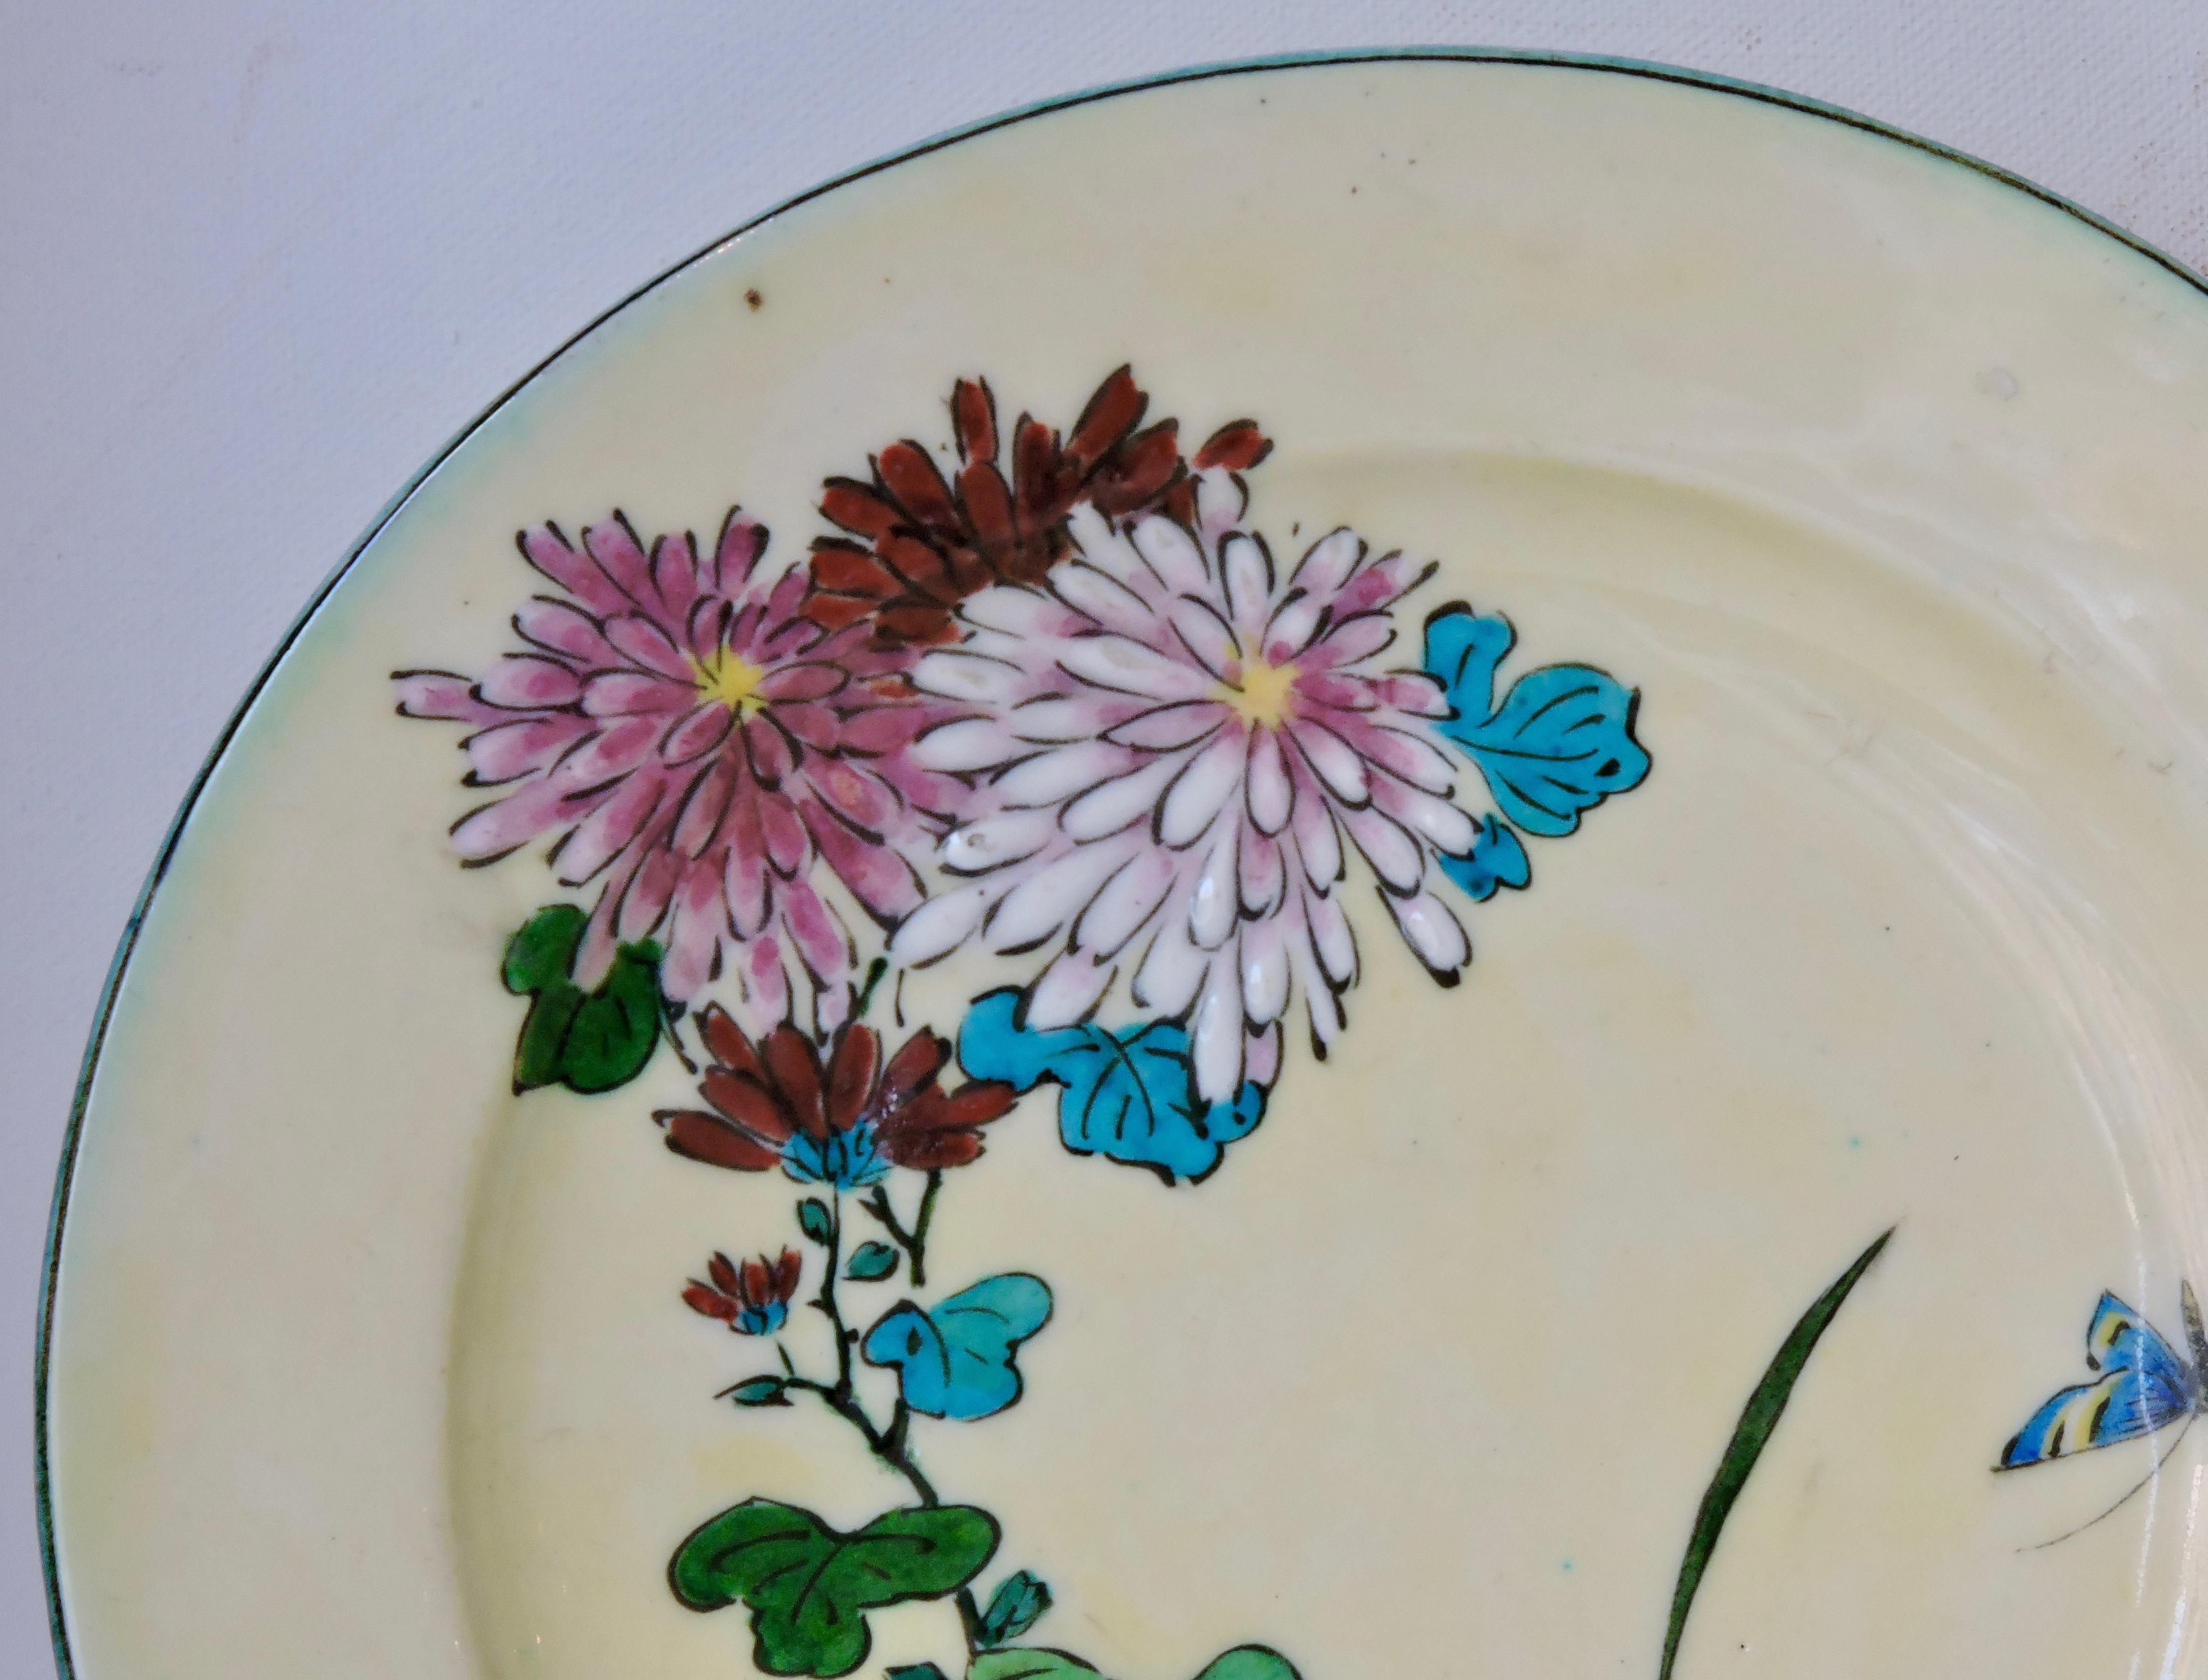 A Théodore Deck circular enamelled faience platter with polychrome design of flowers and butterflies on a cream background.
Signed with TH. Deck stamp on the reverse
circa 1870.